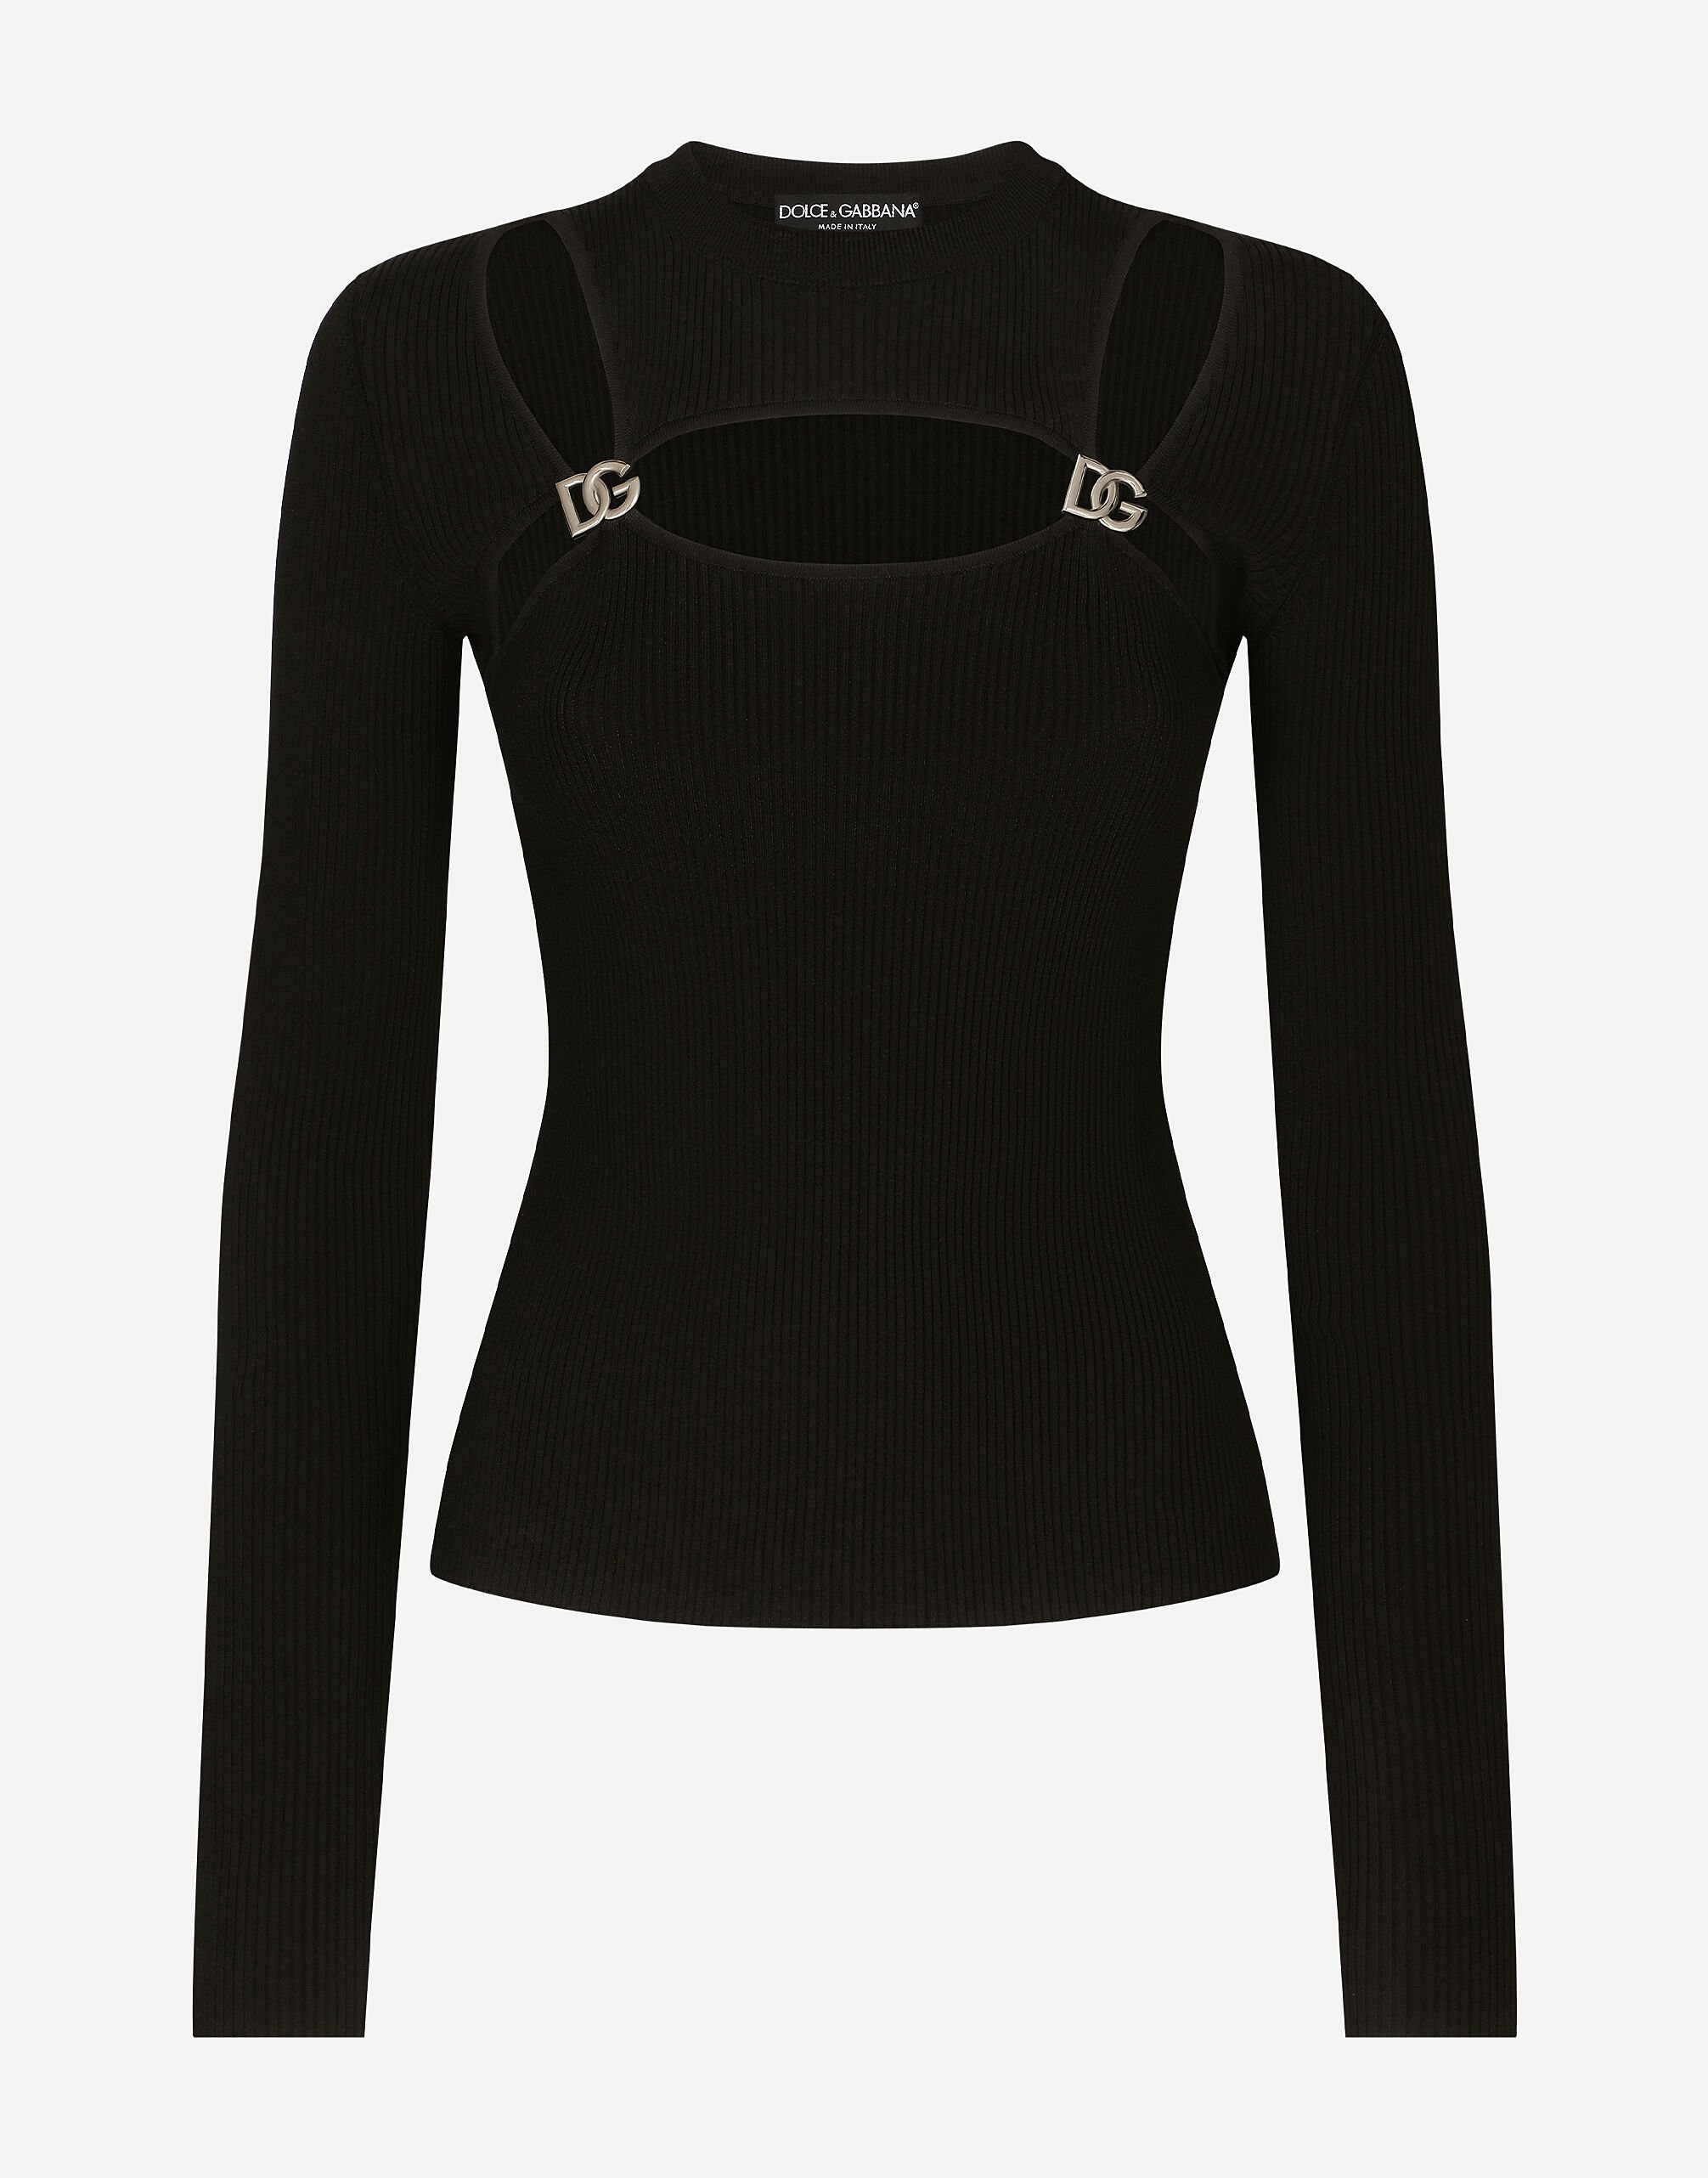 Dolce & Gabbana Ribbed viscose sweater with DG details Black FXI48TJAIL1